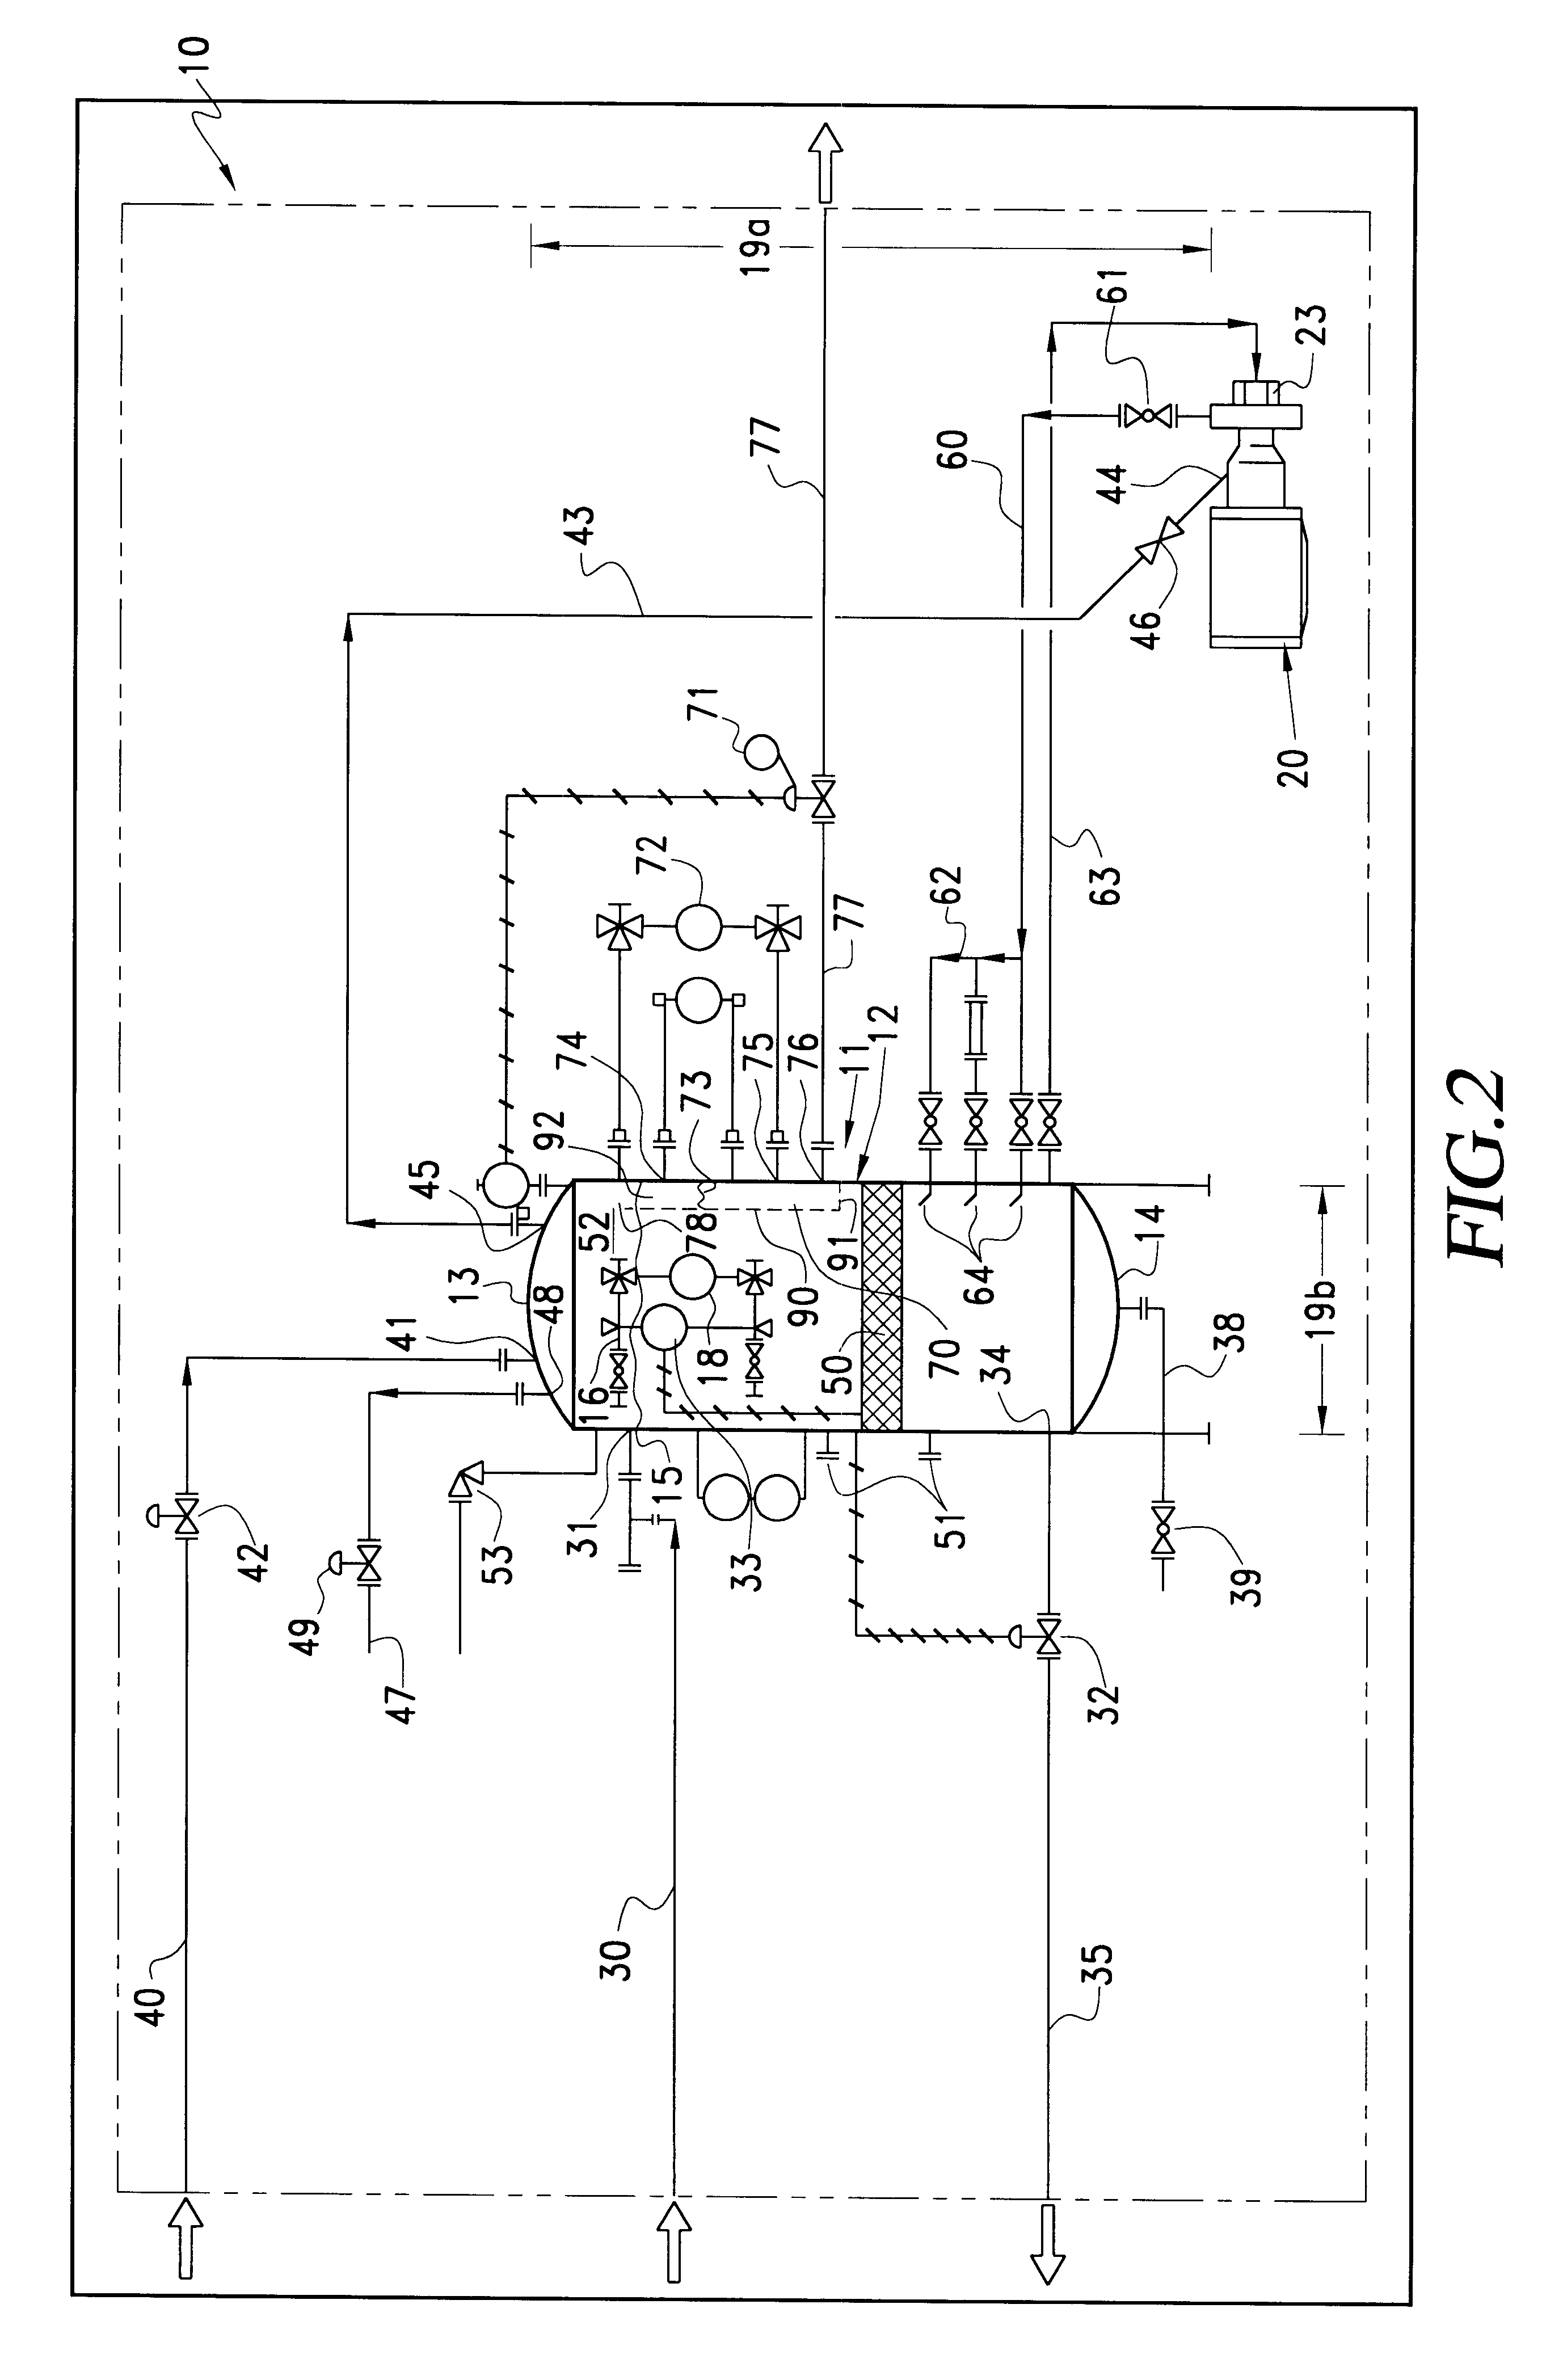 Flotation apparatus for clarifying produced water